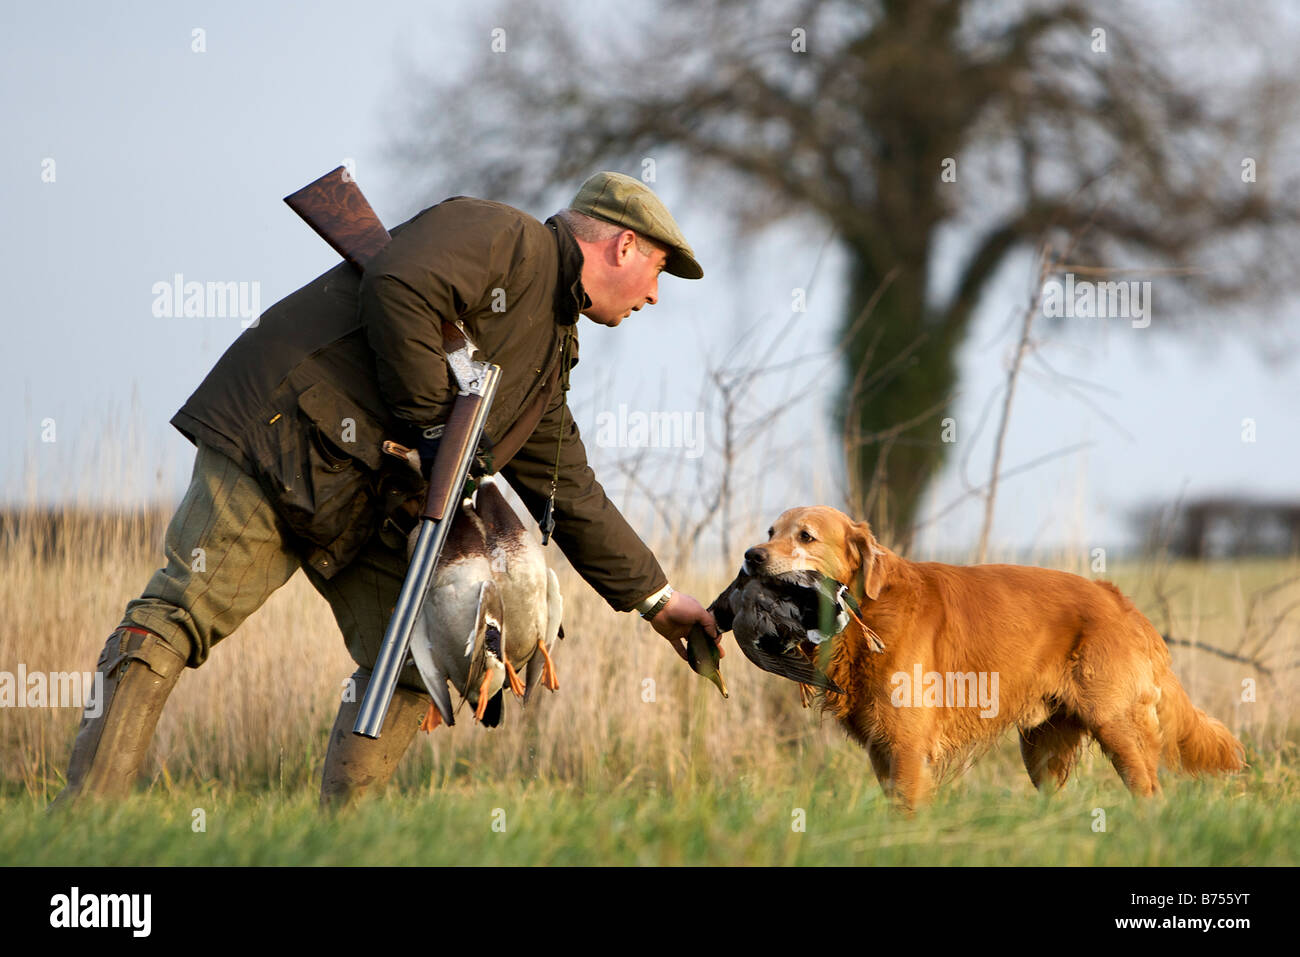 A Golden Retriever hands over a dead Mallard duck to it's owner during a game shoot Stock Photo